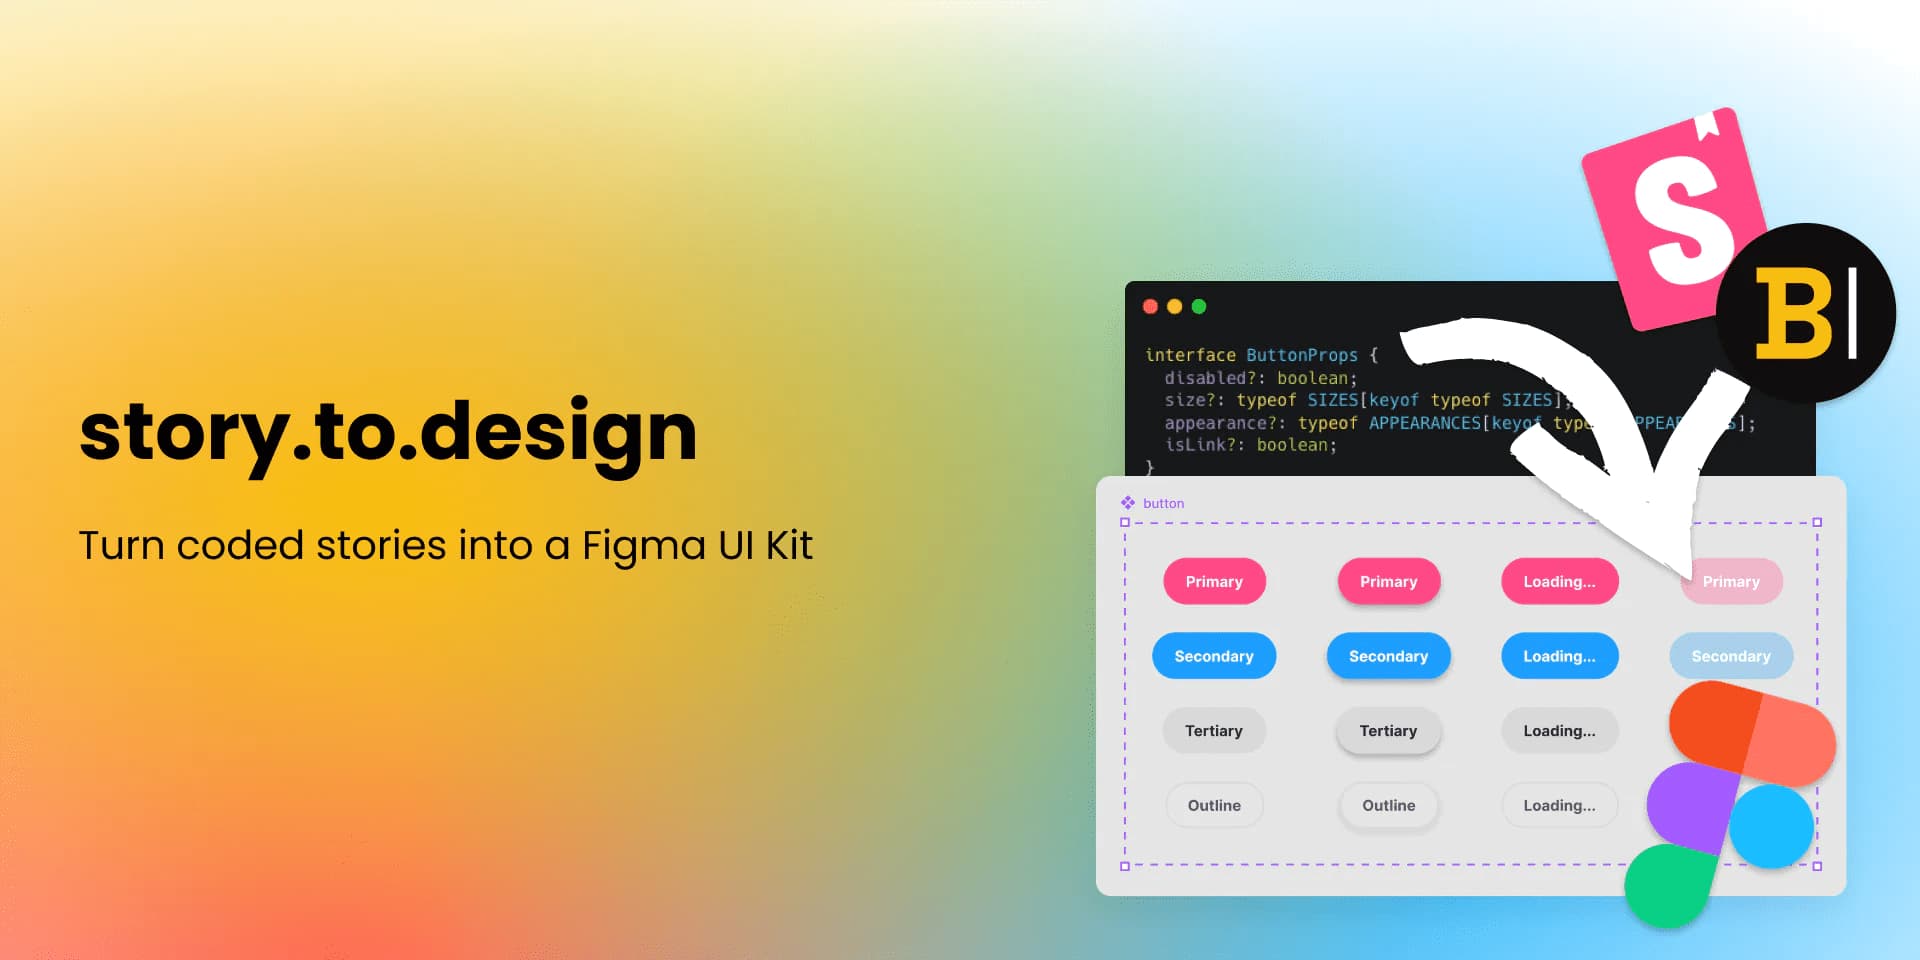 story.to.design: Turn coded stories into a Figma UI Kit